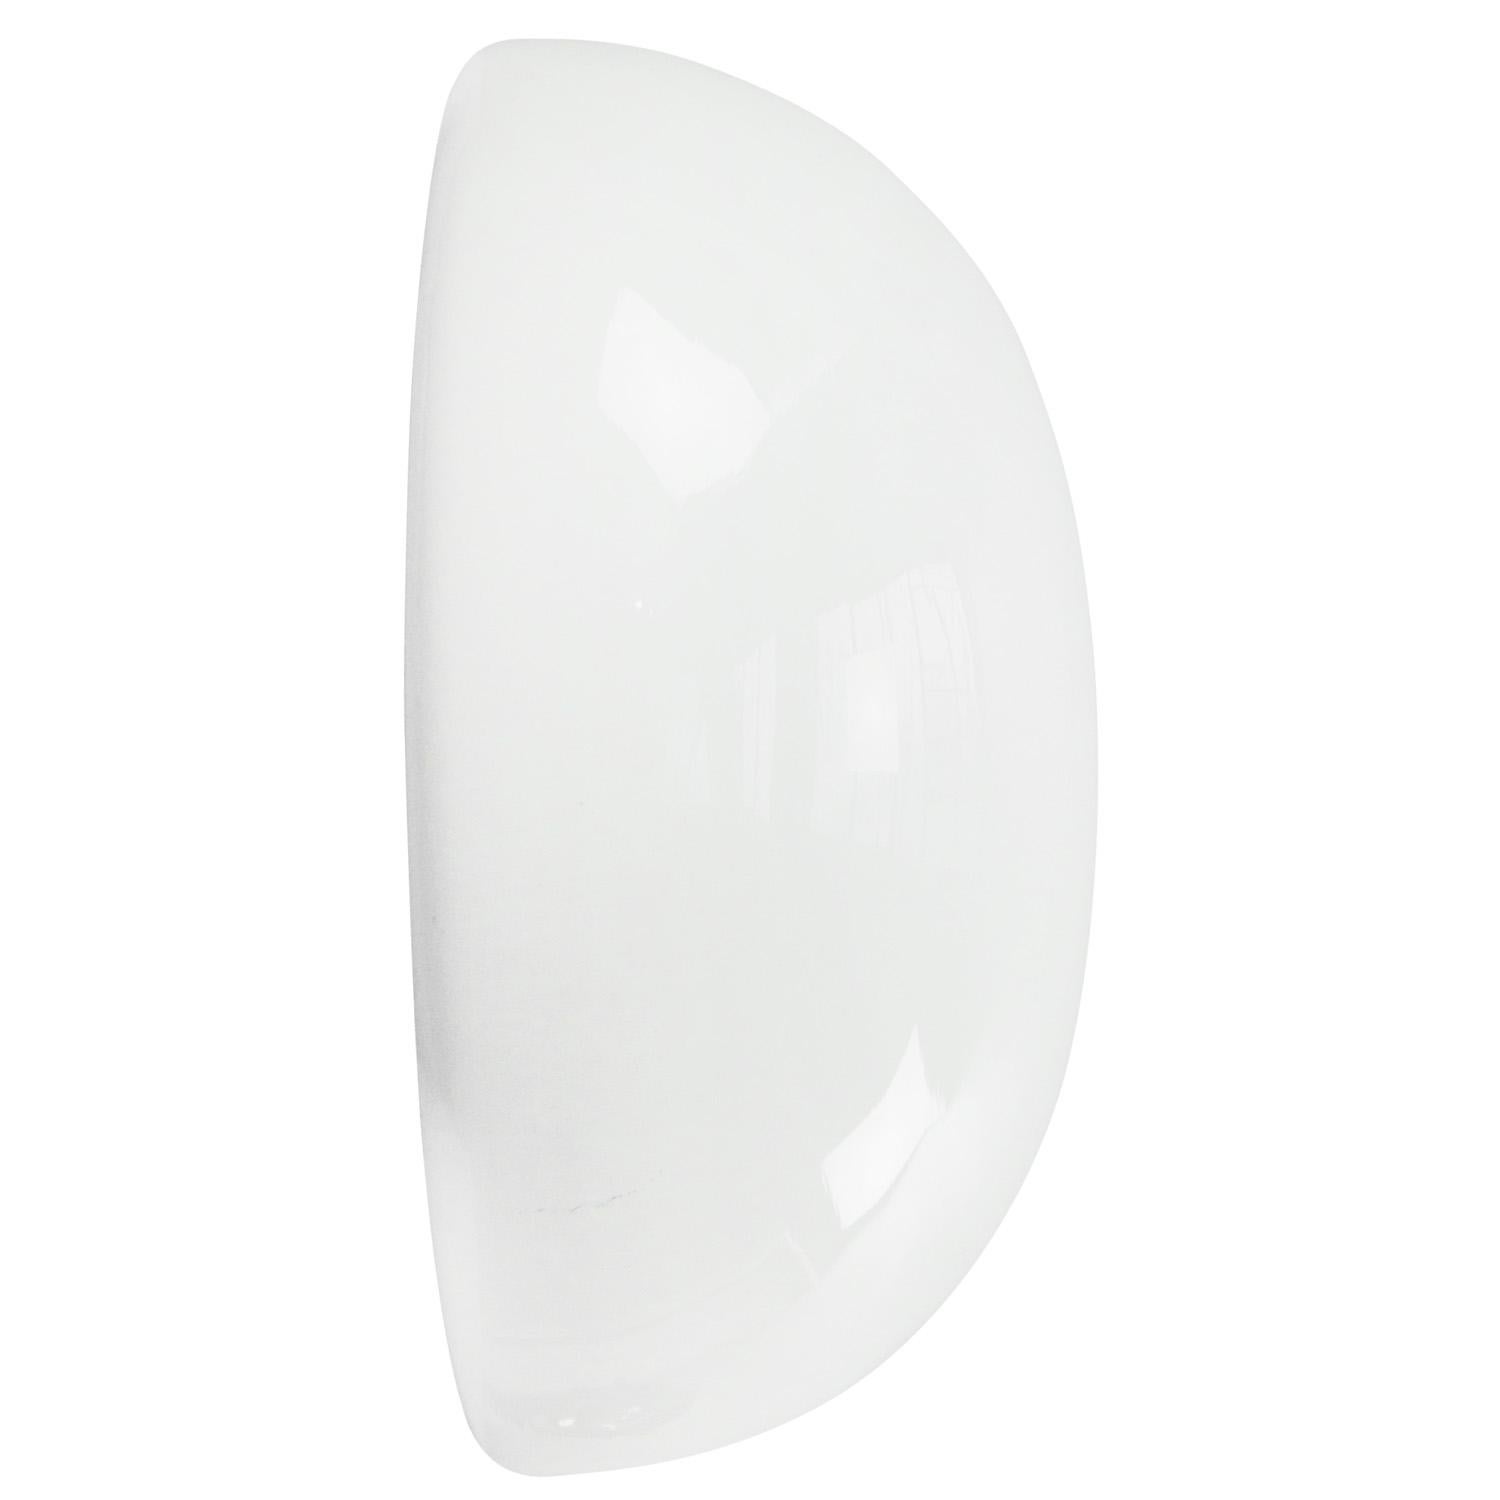 Belgian opaline industrial ceiling lamp.

Iron base with white opaline glass.

2x E27 / E26.

Weight: 1.80 kg / 4 lb.

Priced per individual item. All lamps have been made suitable by international standards for incandescent light bulbs,